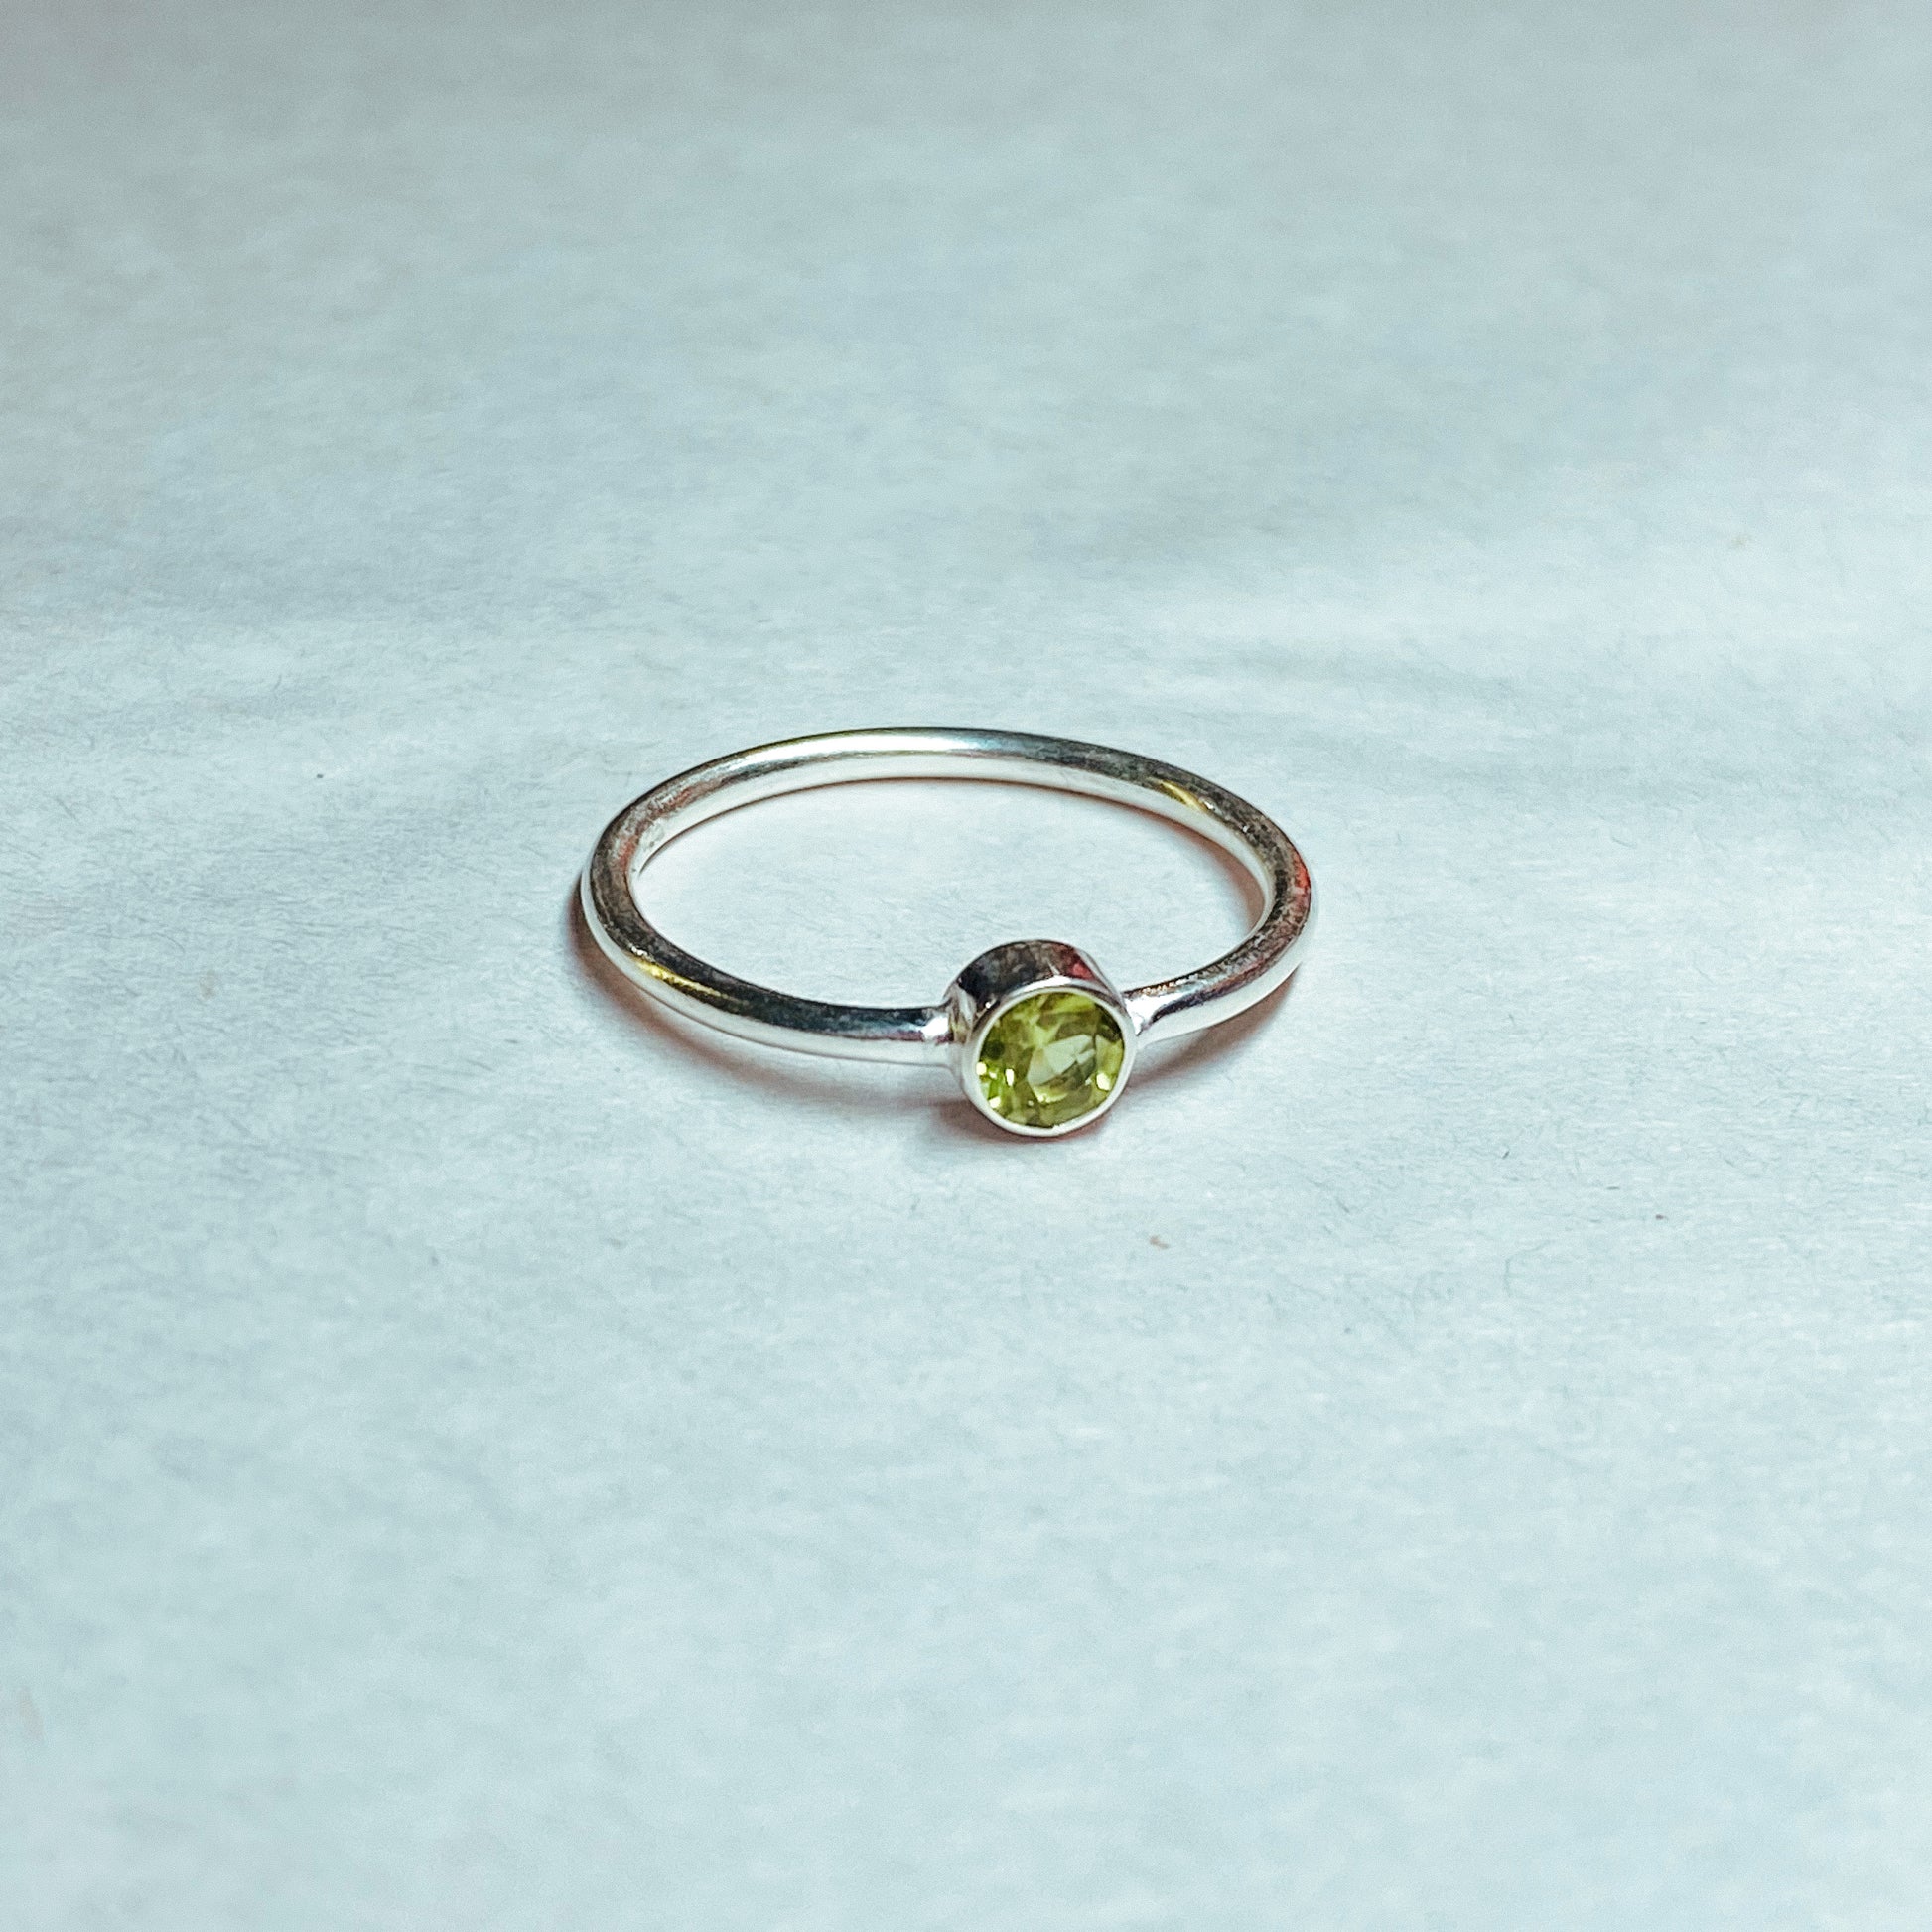 Peridot Delicate 925 Sterling Silver Ring - Rivendell Shop